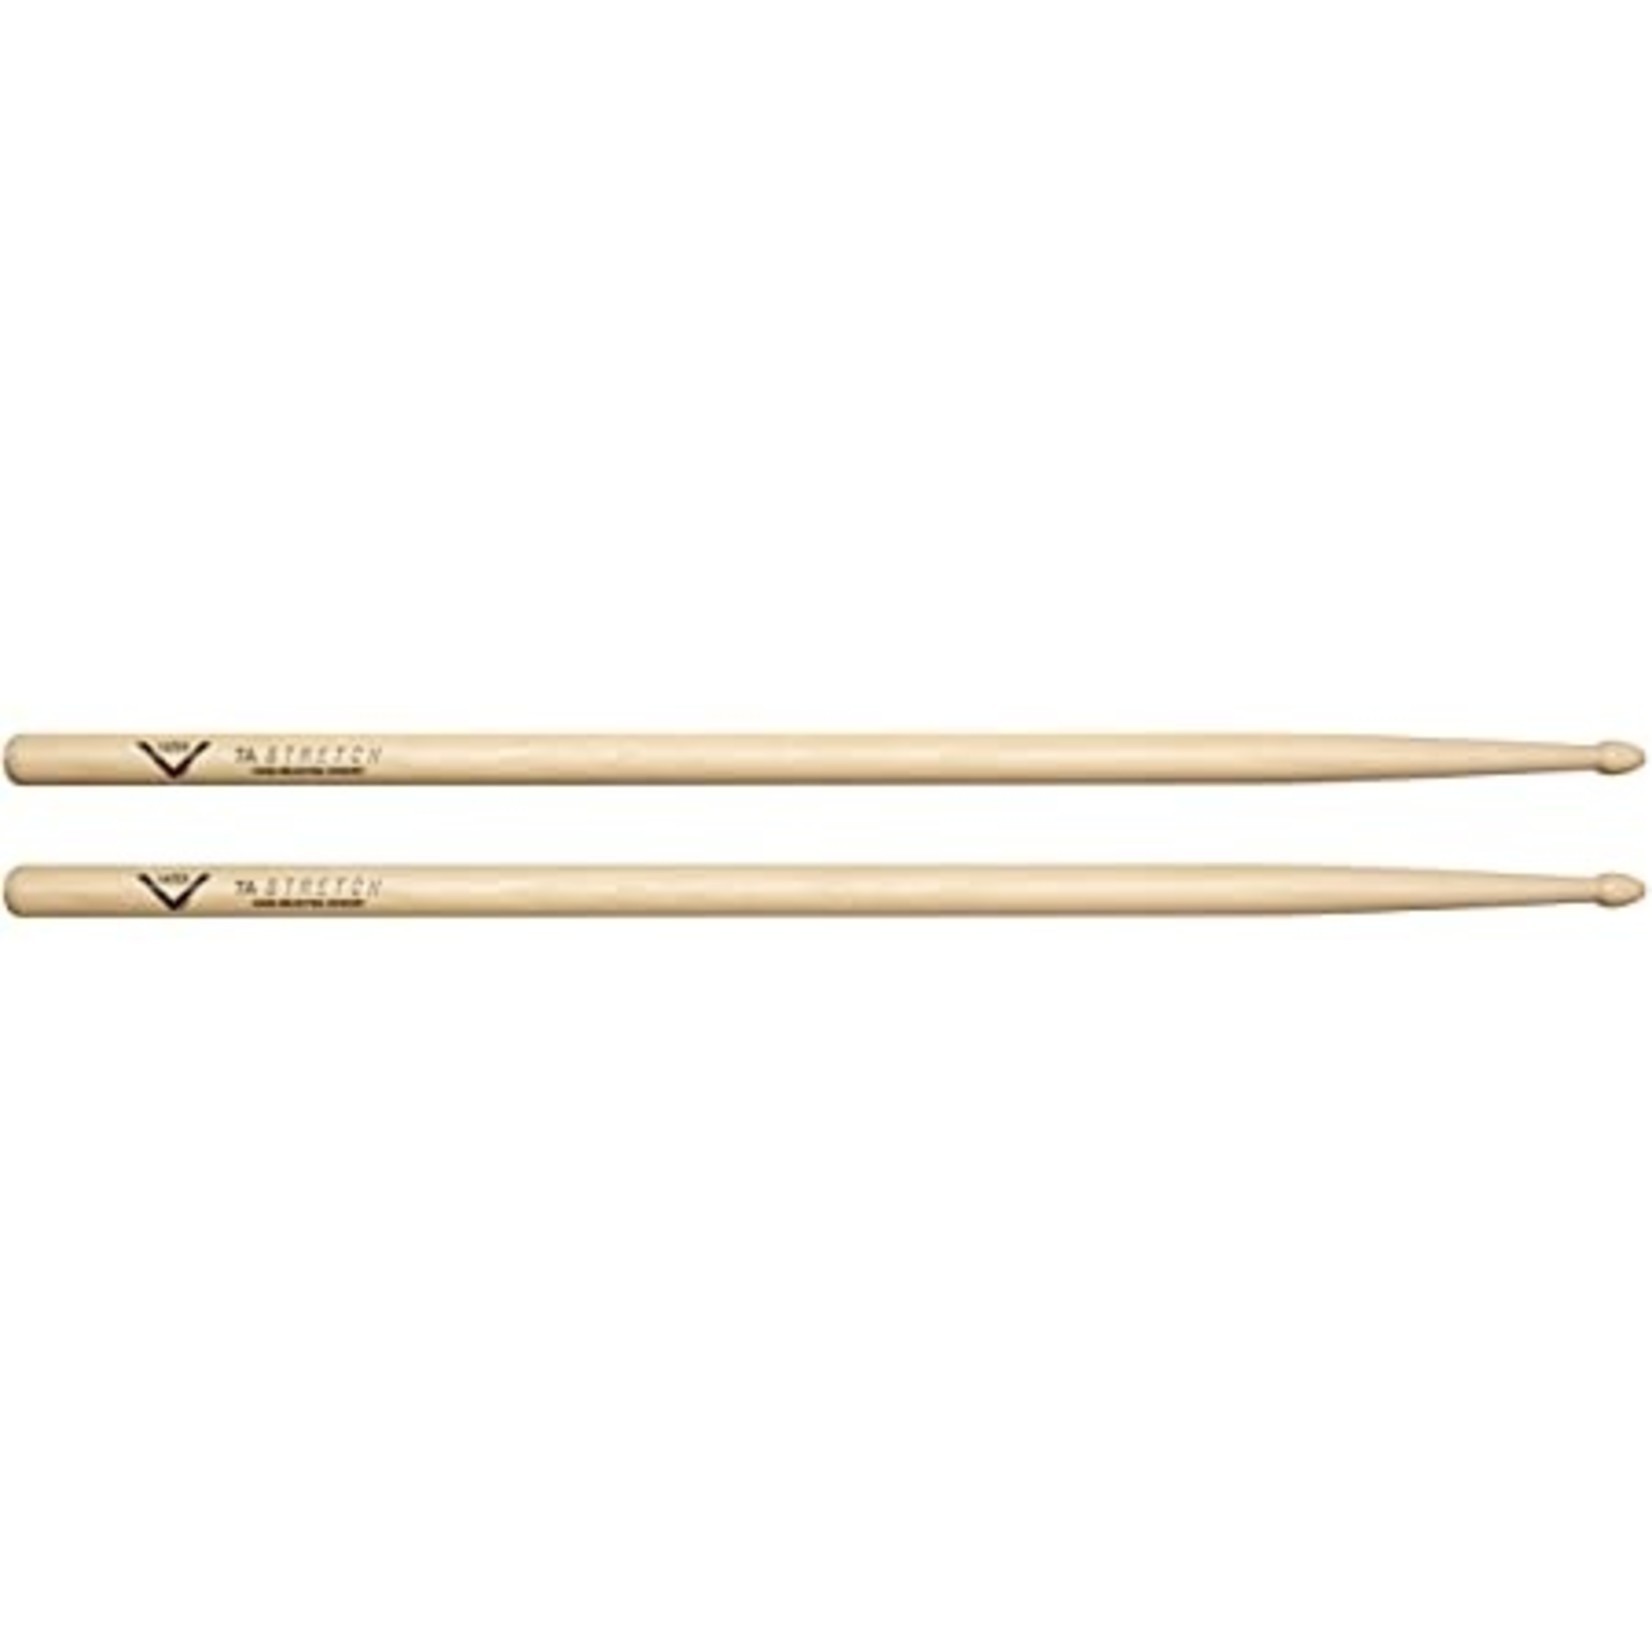 Vater Vater 7A Stretch